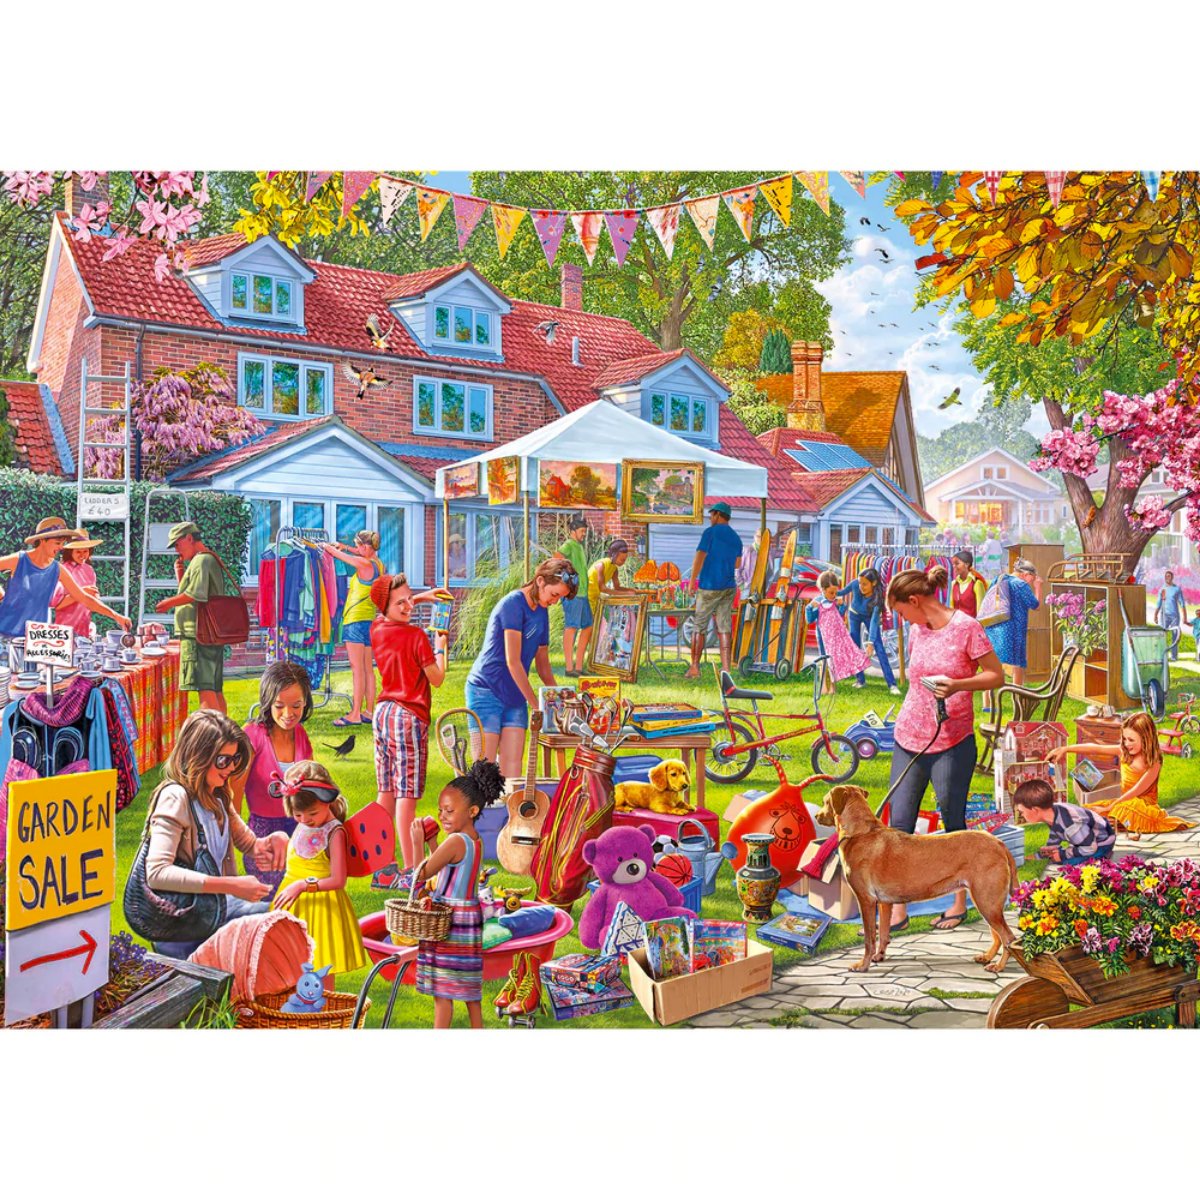 Gibsons G6339 Bargain Hunting 1000 Piece Jigsaw Puzzle